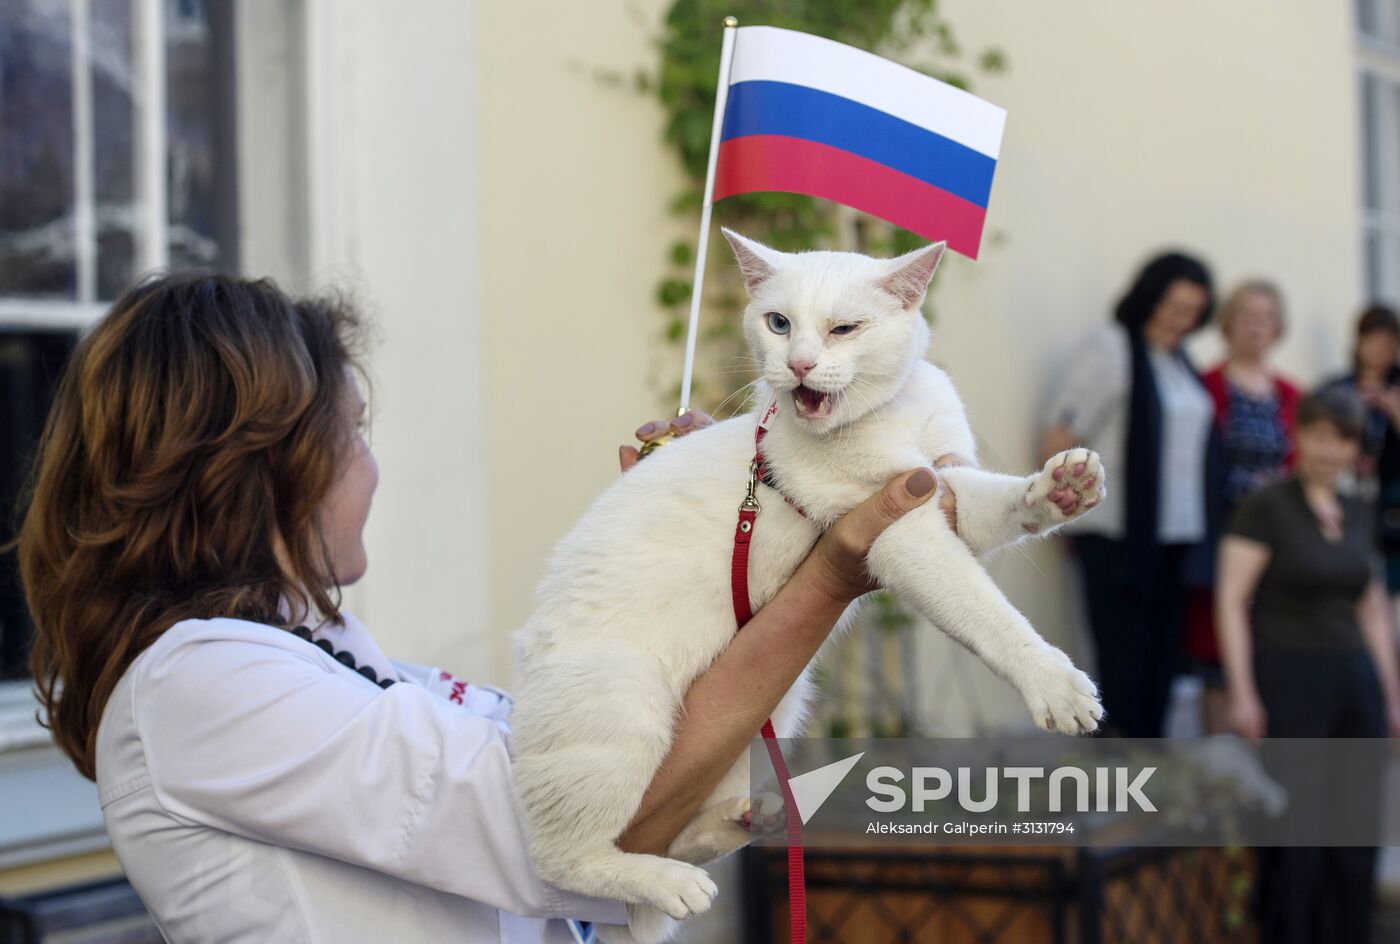 Oracle cat predicts Russia's victory in match against New Zealand